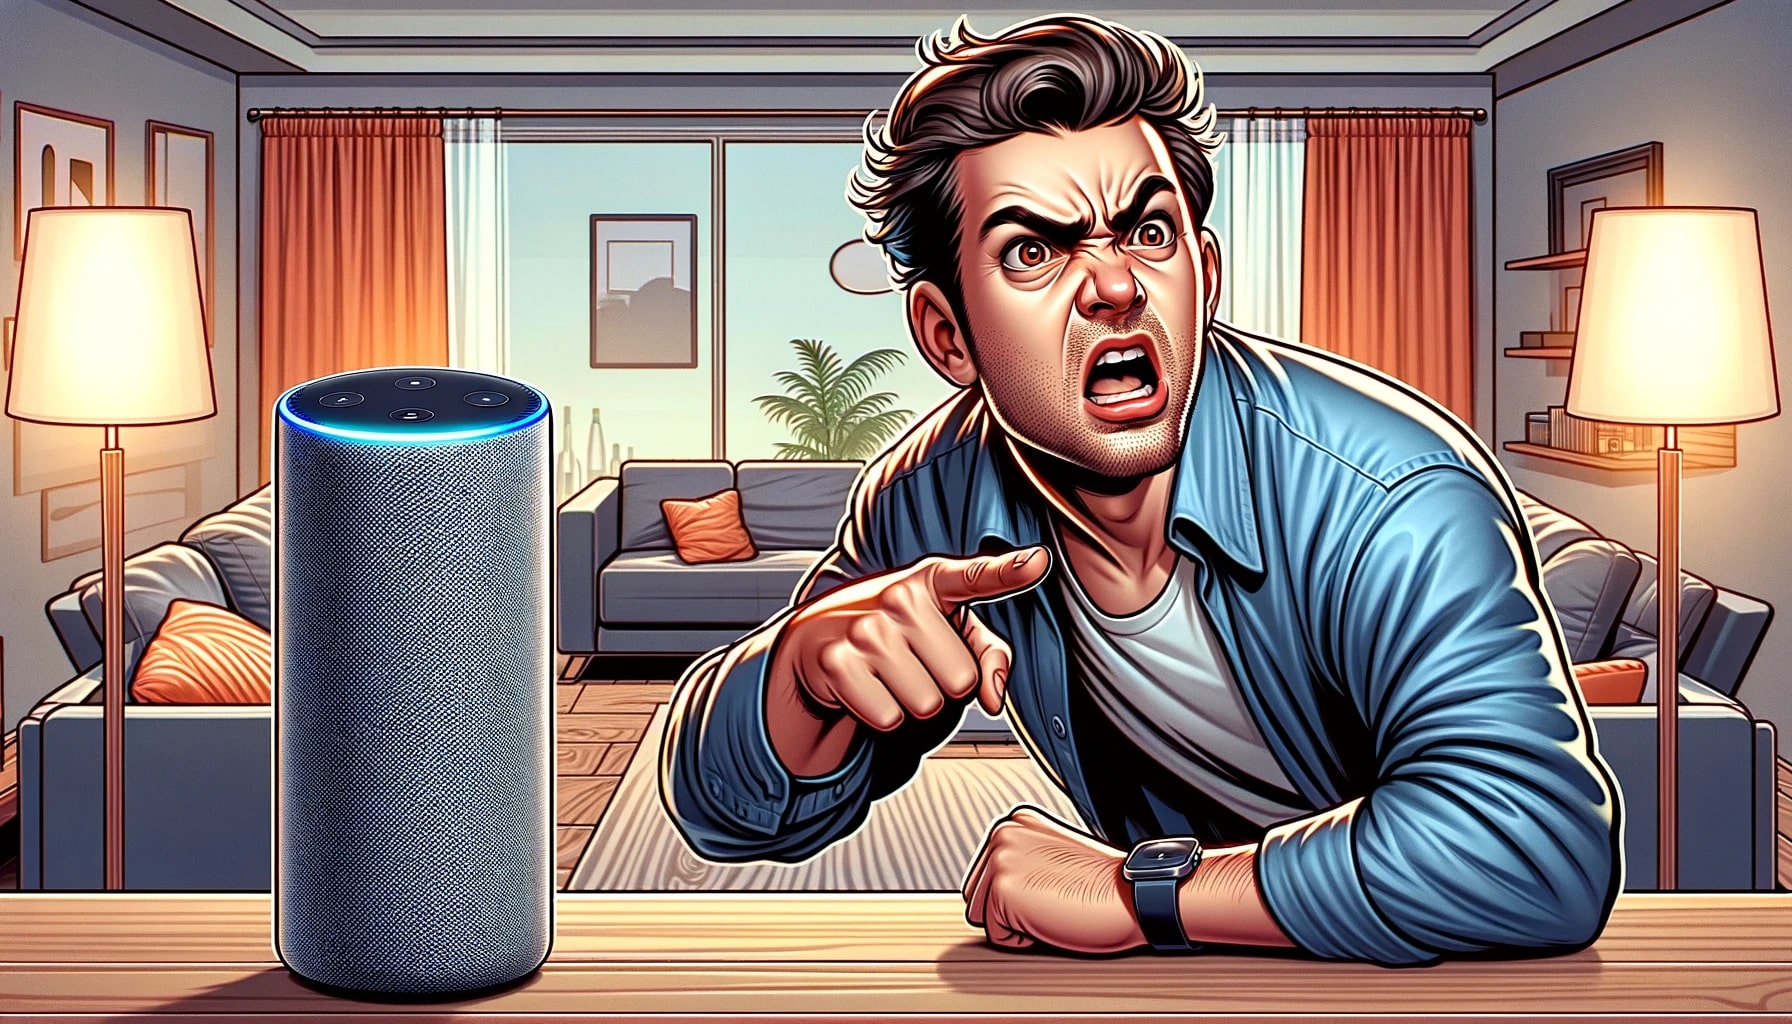 Man frustrated with smart speaker in living room.